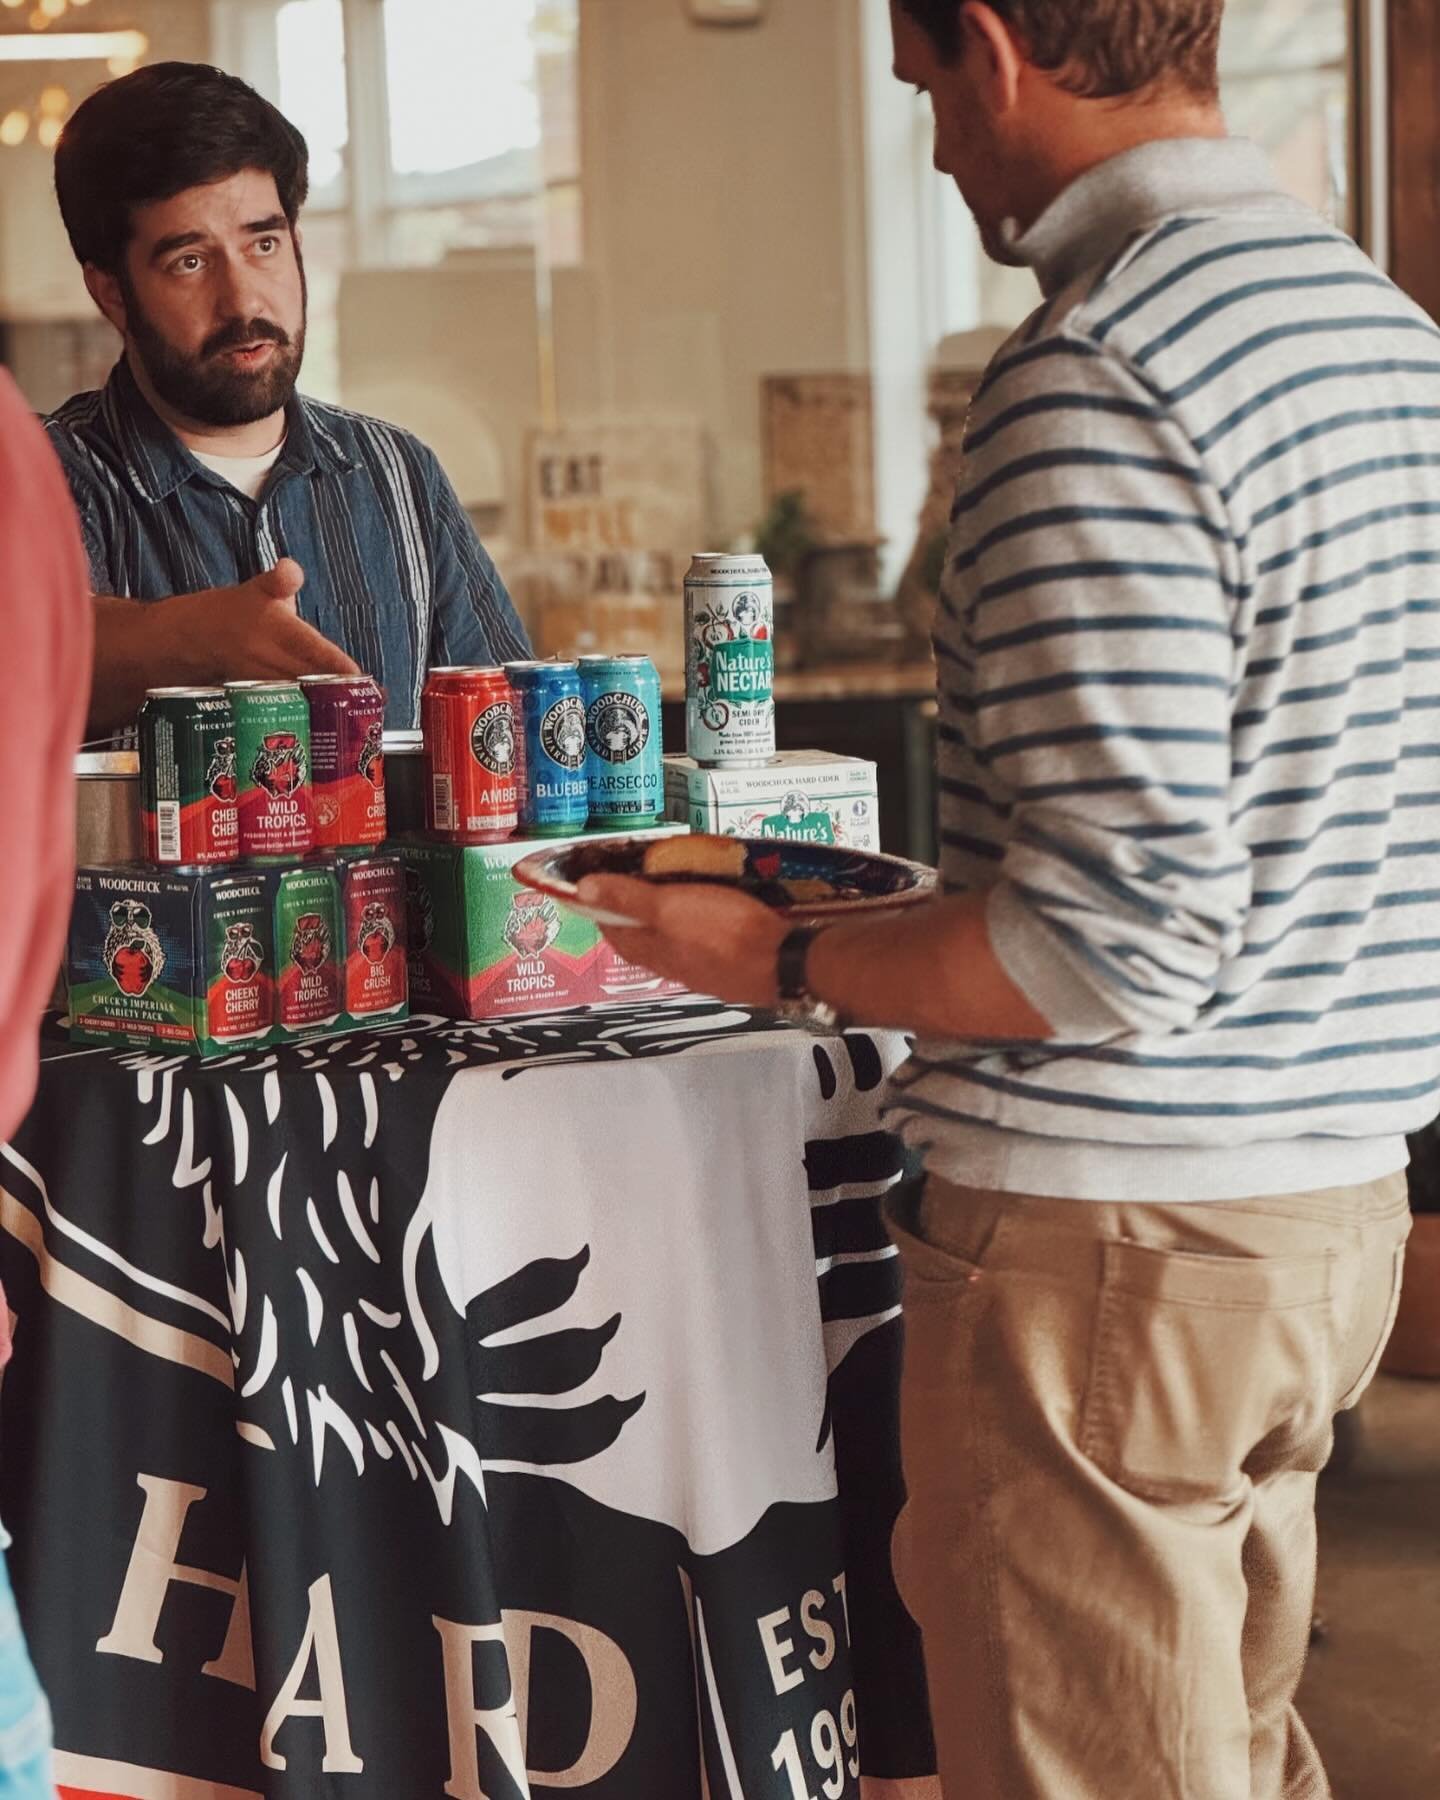 Huge thank you to everyone who came out yesterday to our first member BBQ of the year! Special shoutout to Tom from @woodchuckcider for treating us to samples of their delicious cider! 🍻🍎🍔 

#cowork #cloudport #portlandmaine
#cloudportcoworking #m